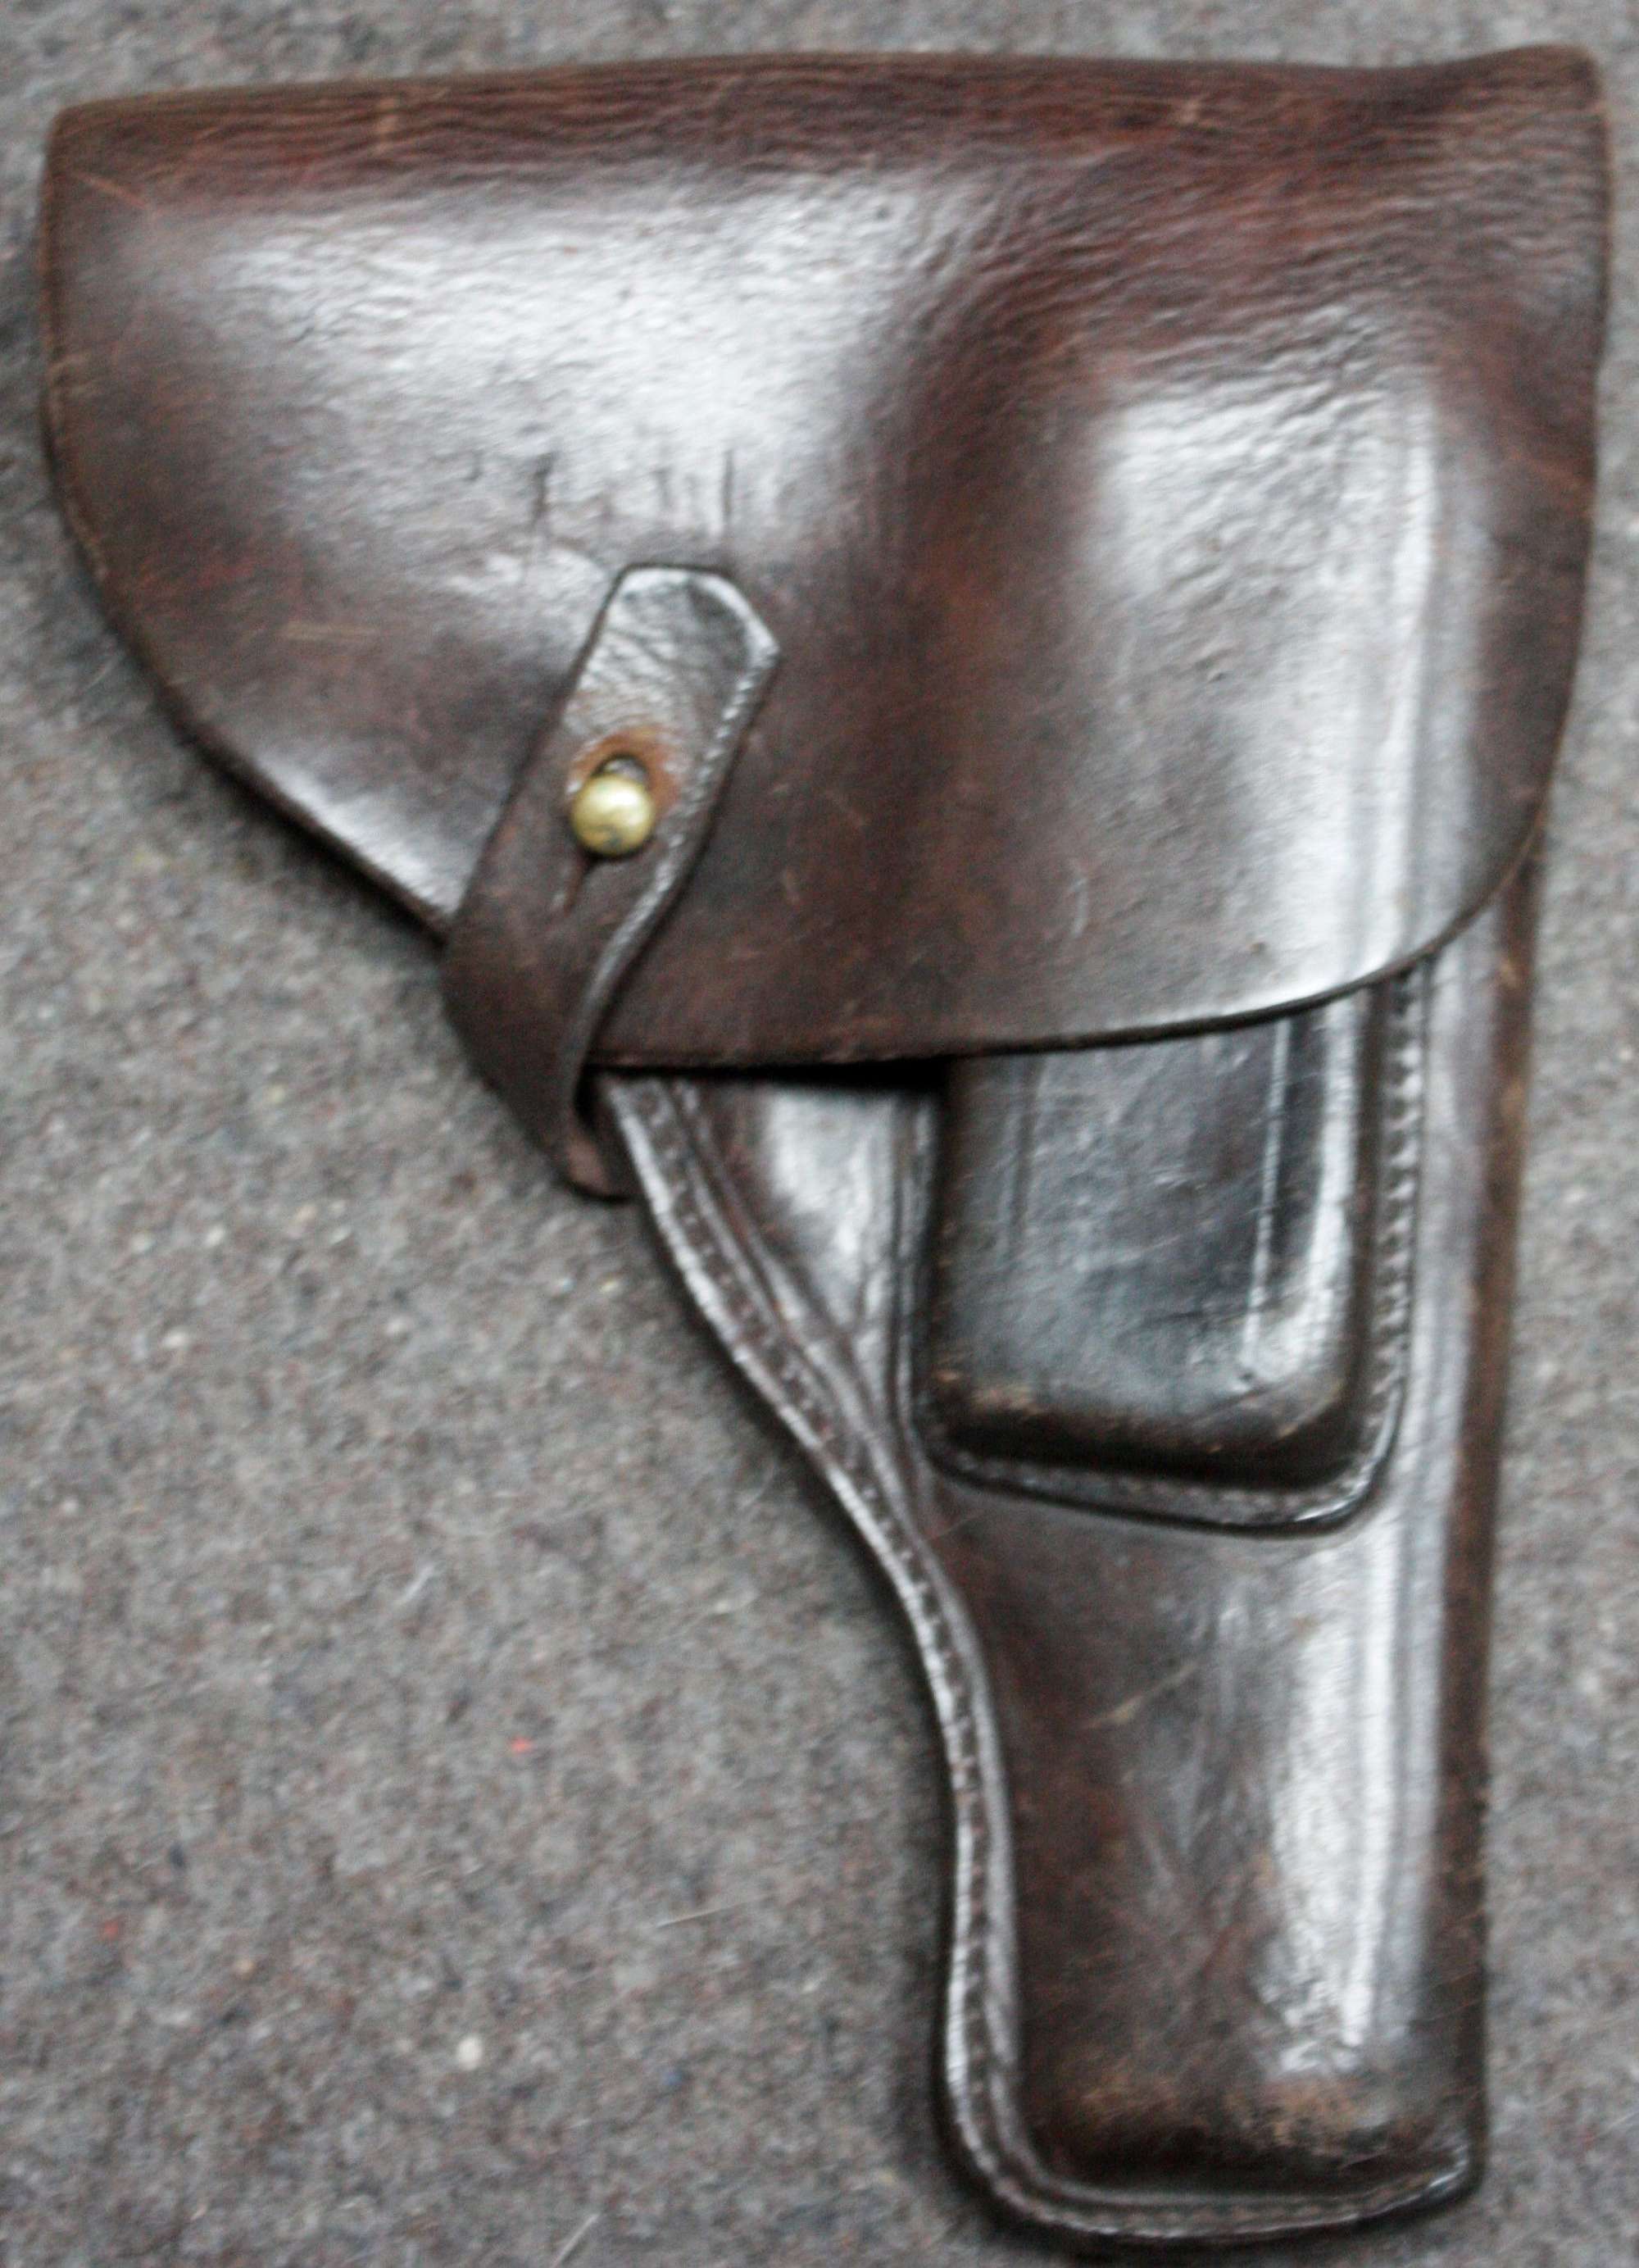 A WWII WWII RUSSIAN PISTOL POUCH WITH A MAG